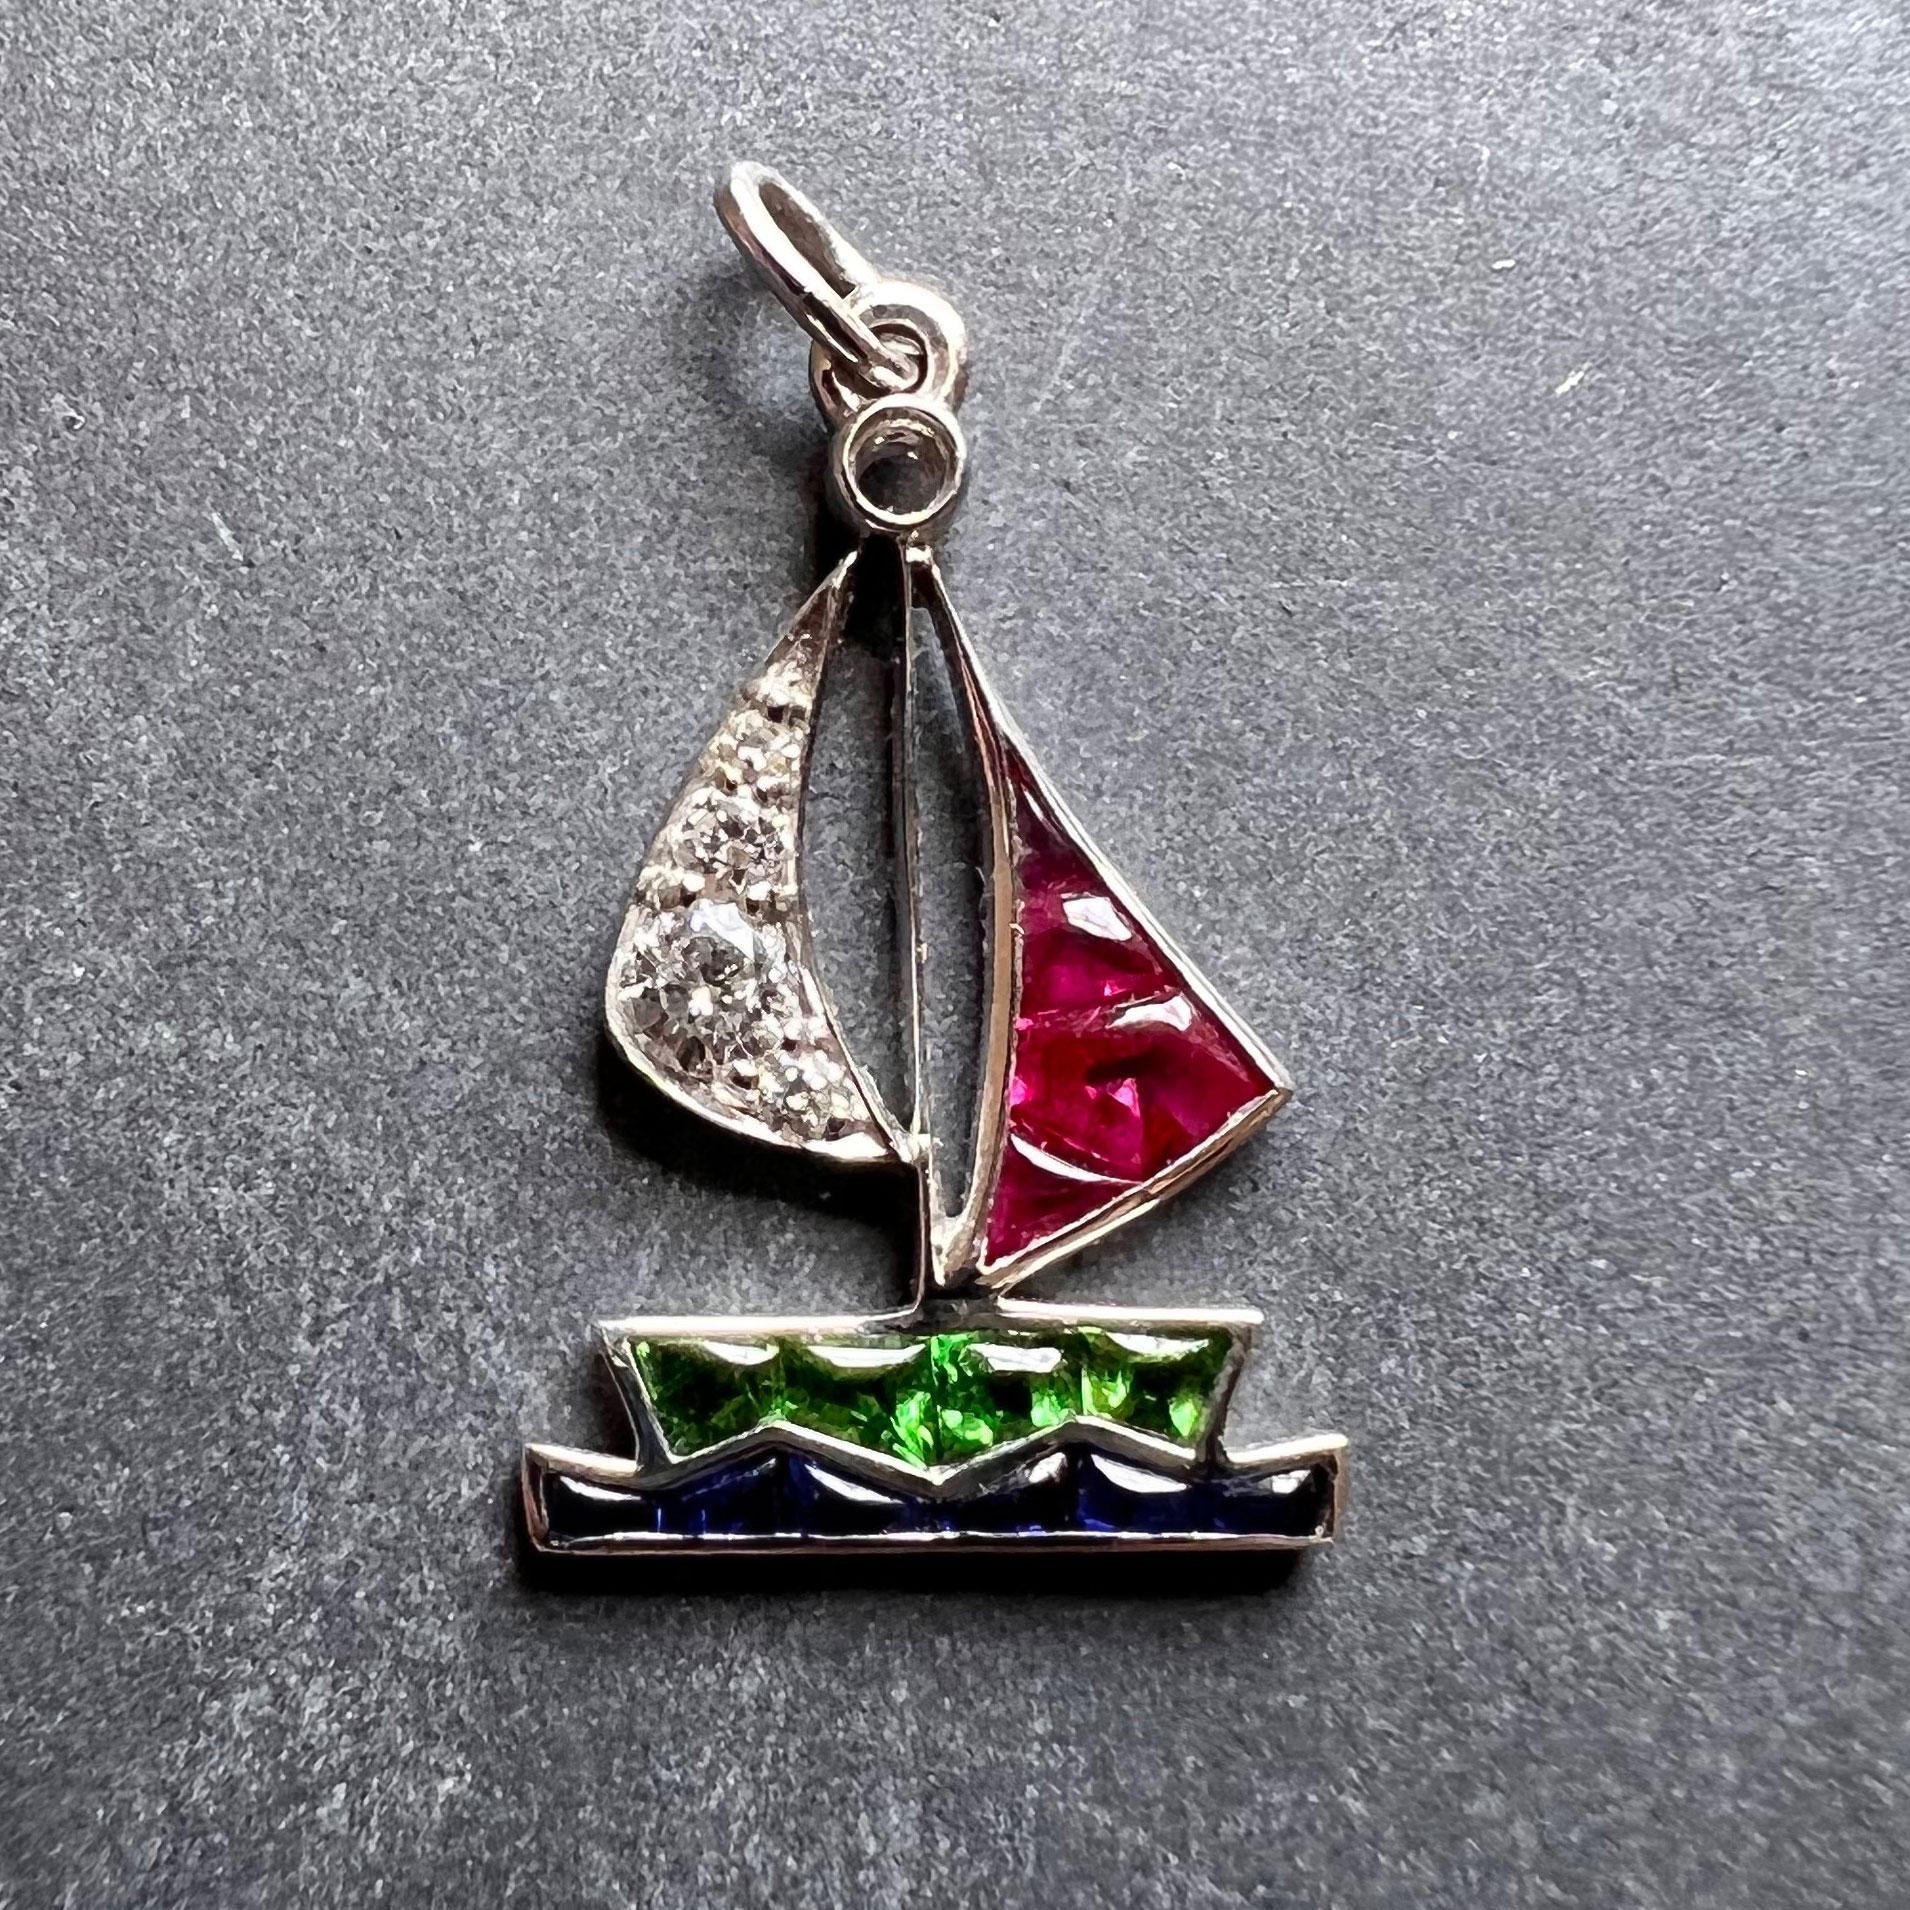 An Art Deco platinum charm pendant designed as a peridot sailboat with ruby and diamond sails on a sapphire set sea. The charm is set with four round brilliant cut diamonds, four buff-top rubies, six buff-top sapphires and four buff-top peridots.